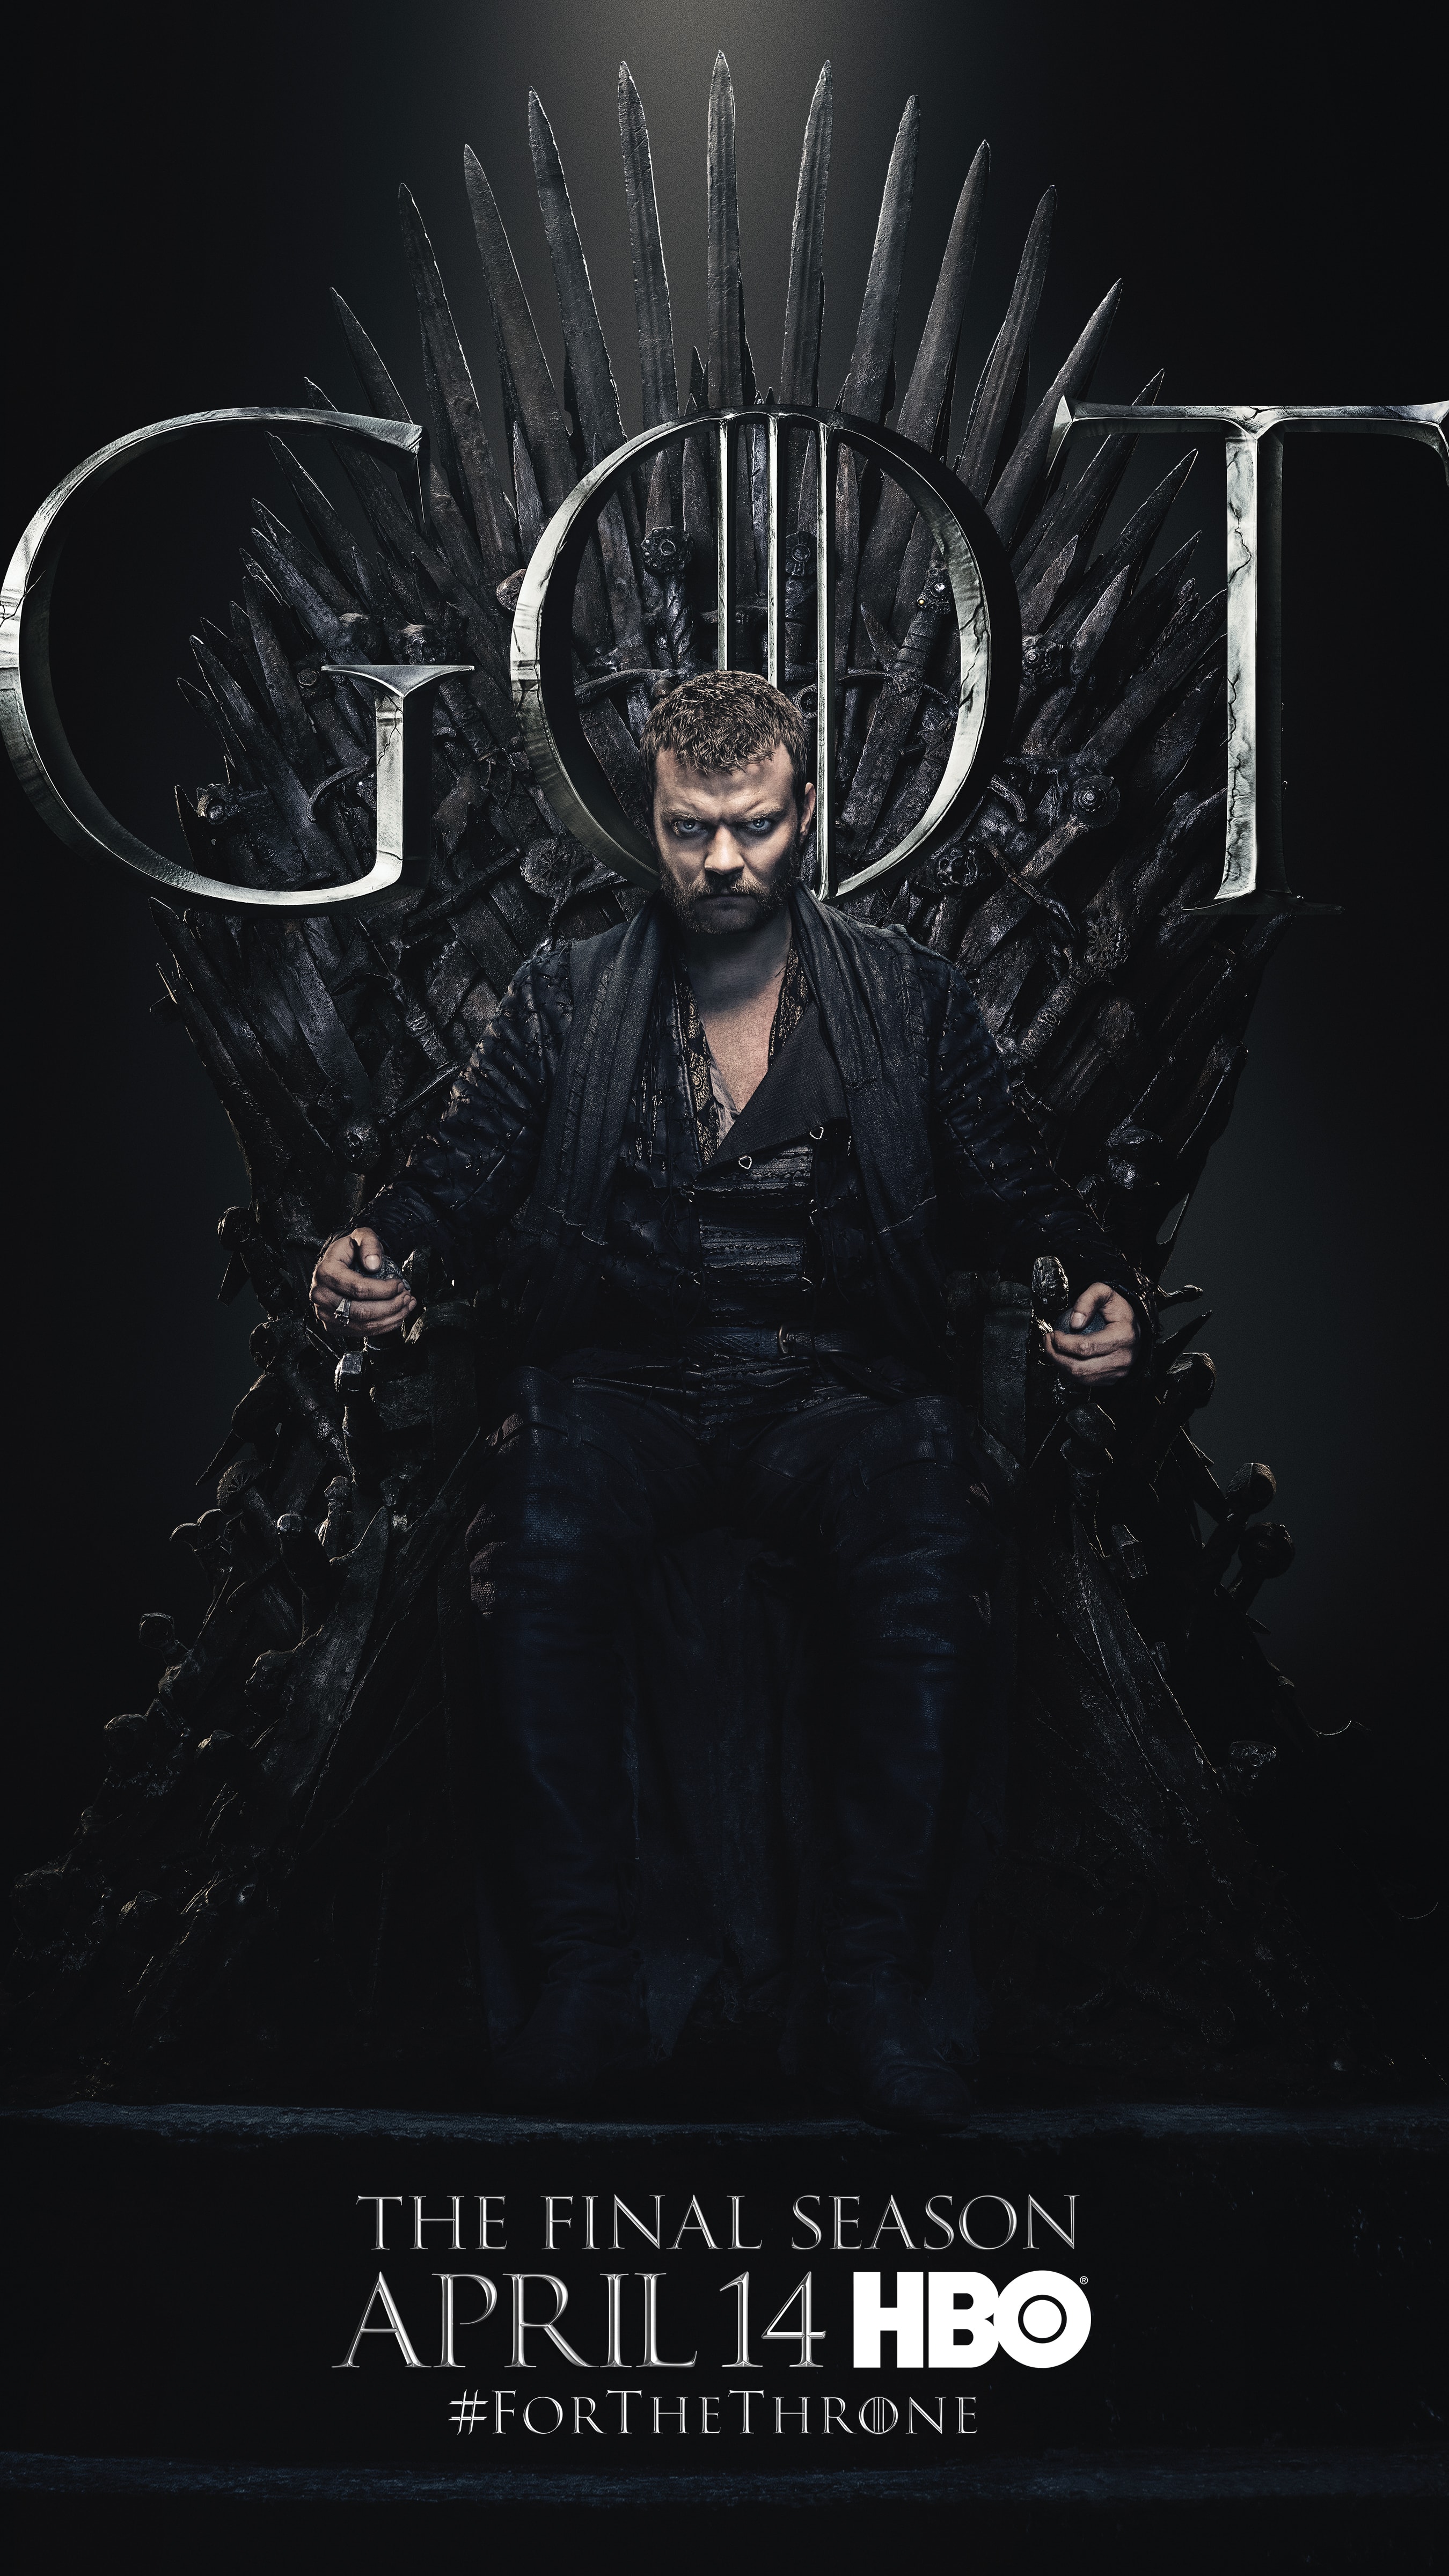 http://www.rozup.ir/up/justbarca/GOTS08/12.-Euron-Greyjoy-GOT-Season-8-For-The-Throne-Character-Poster-min.jpg